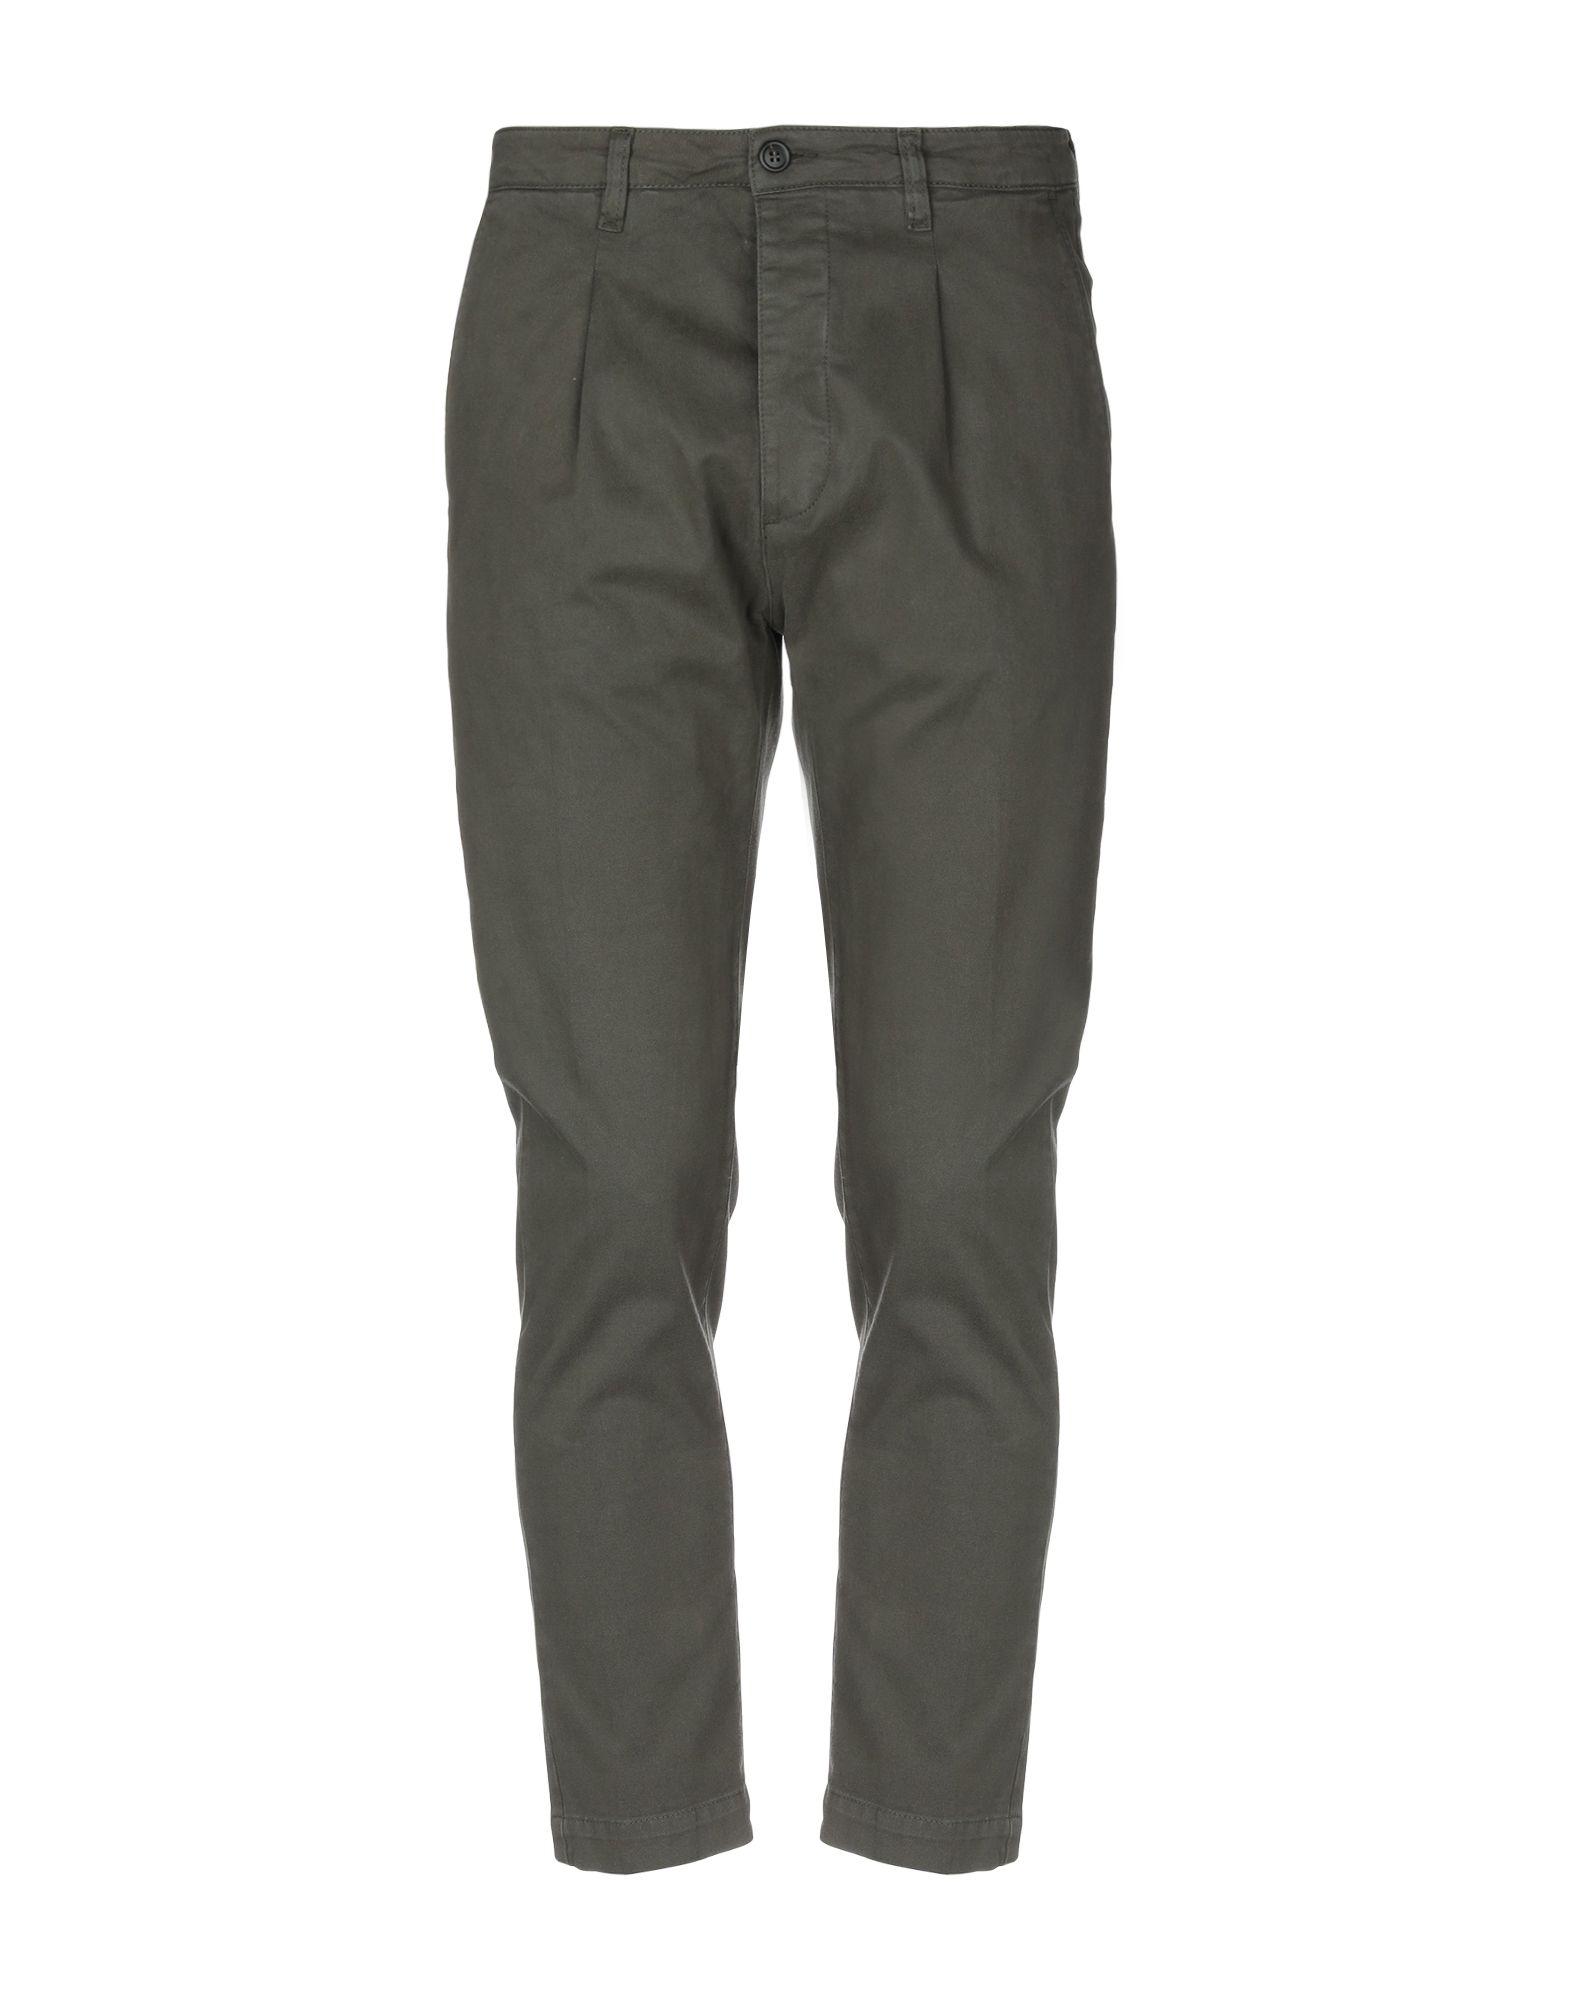 Cruna Cotton Casual Pants in Military Green (Green) for Men - Lyst